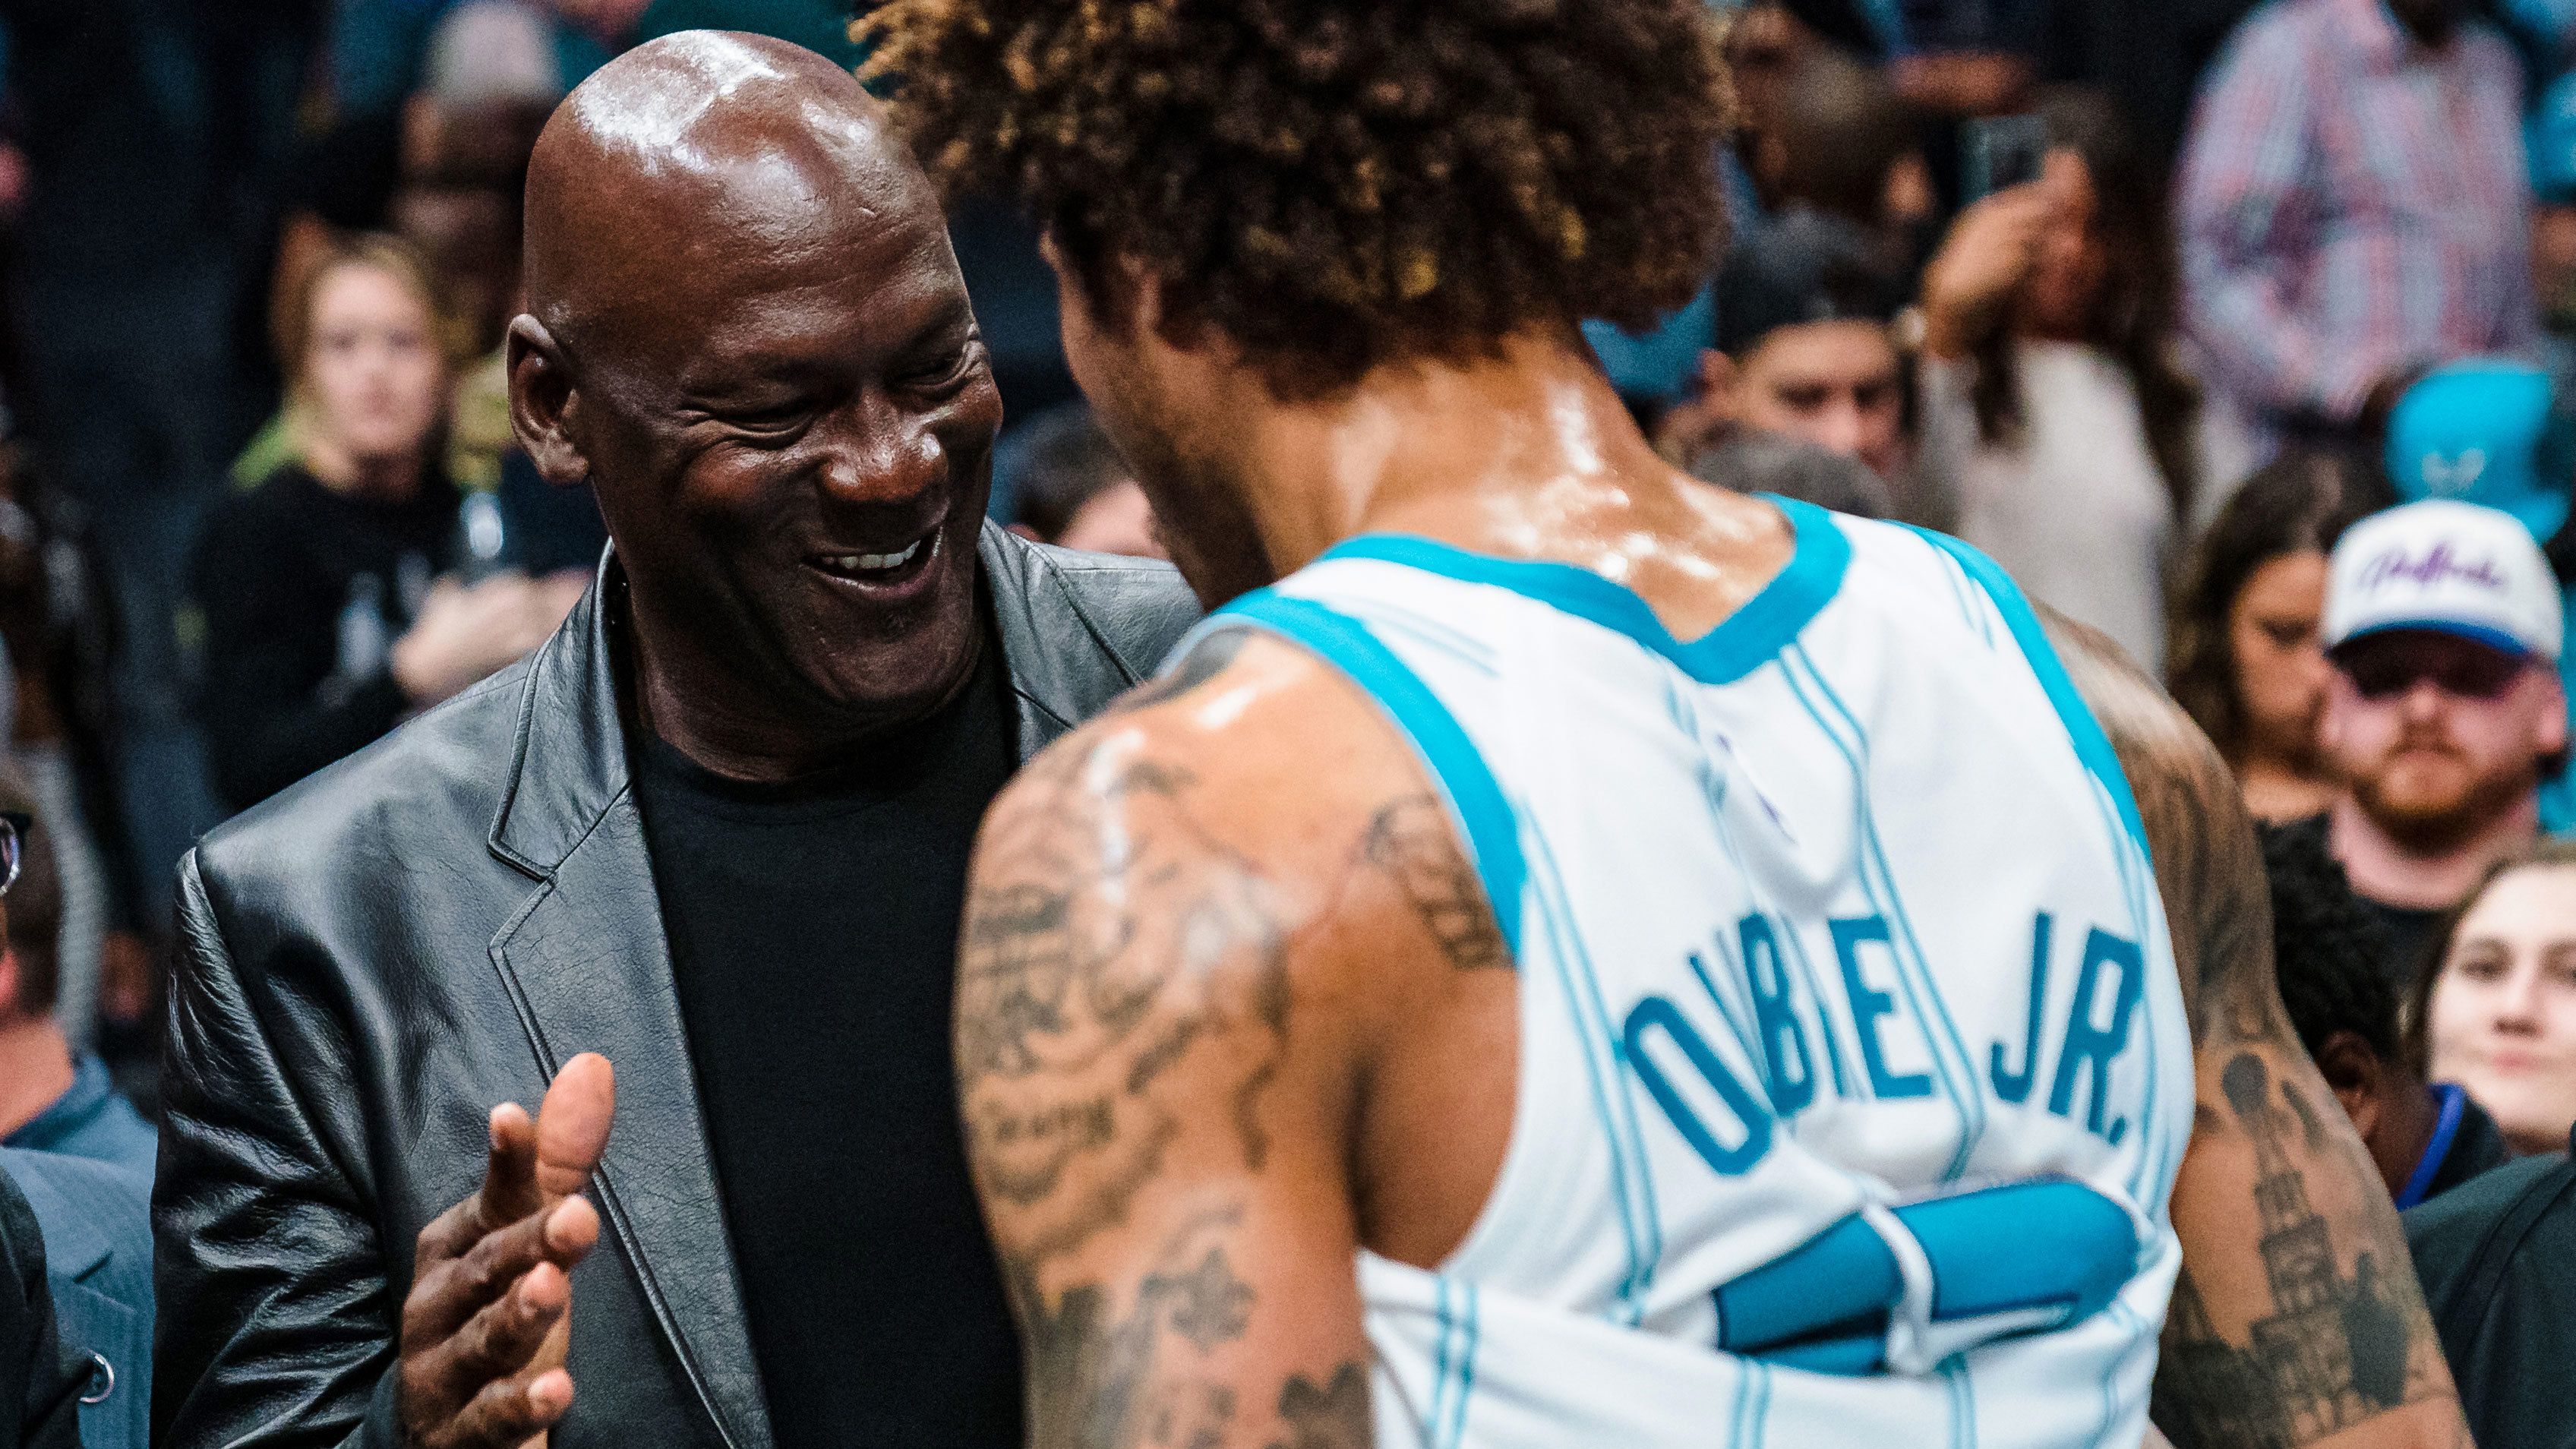 Michael Jordan shakes hands with Kelly Oubre Jr. #12 of the Charlotte Hornets after their game against the Orlando Magic at Spectrum Center on March 03, 2023 in Charlotte, North Carolina.